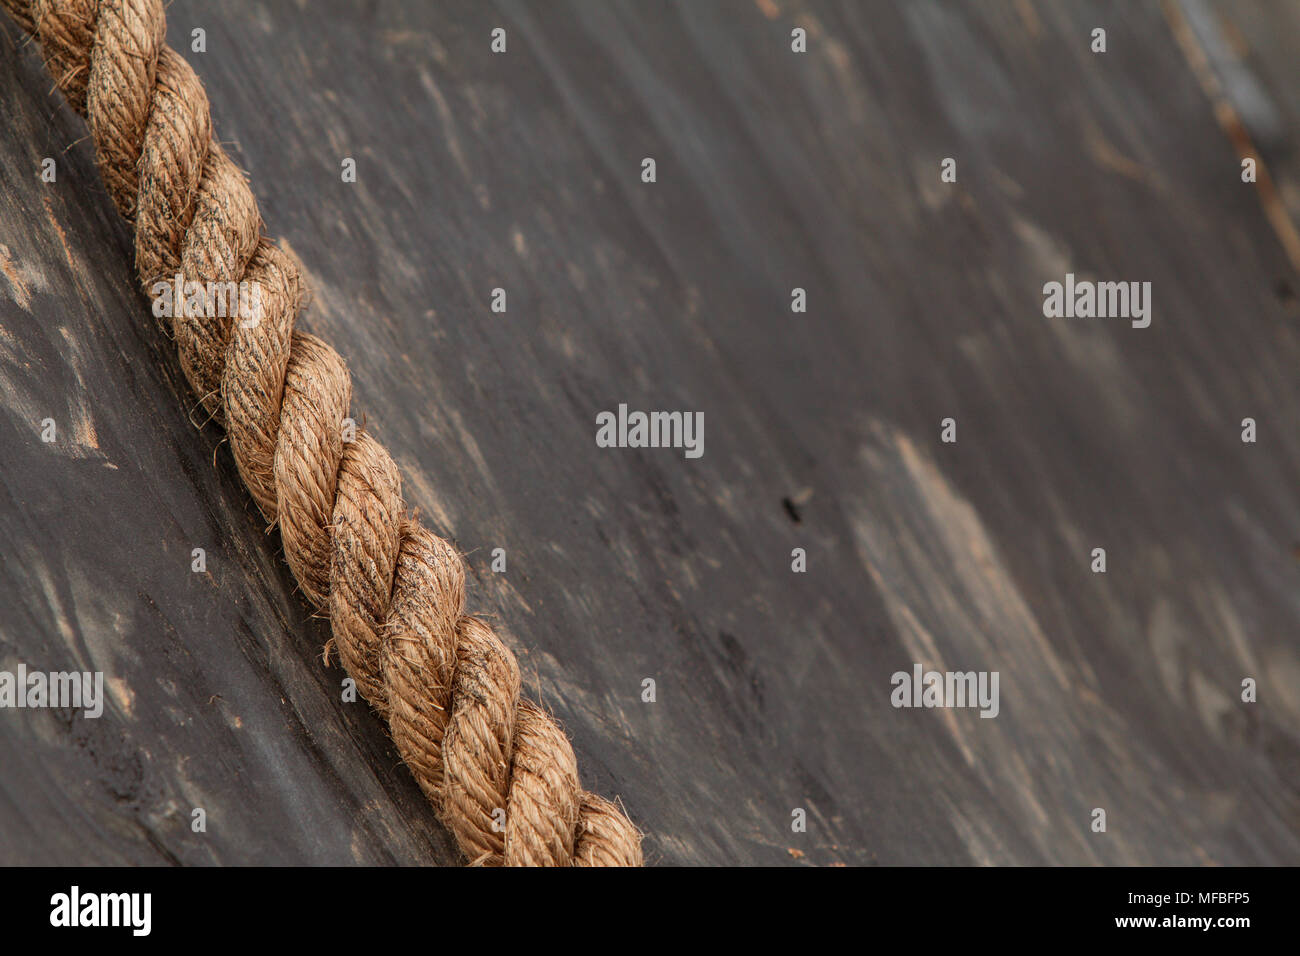 Closeup of thick rope lying against wooden wall at extreme obstacle course race. Stock Photo